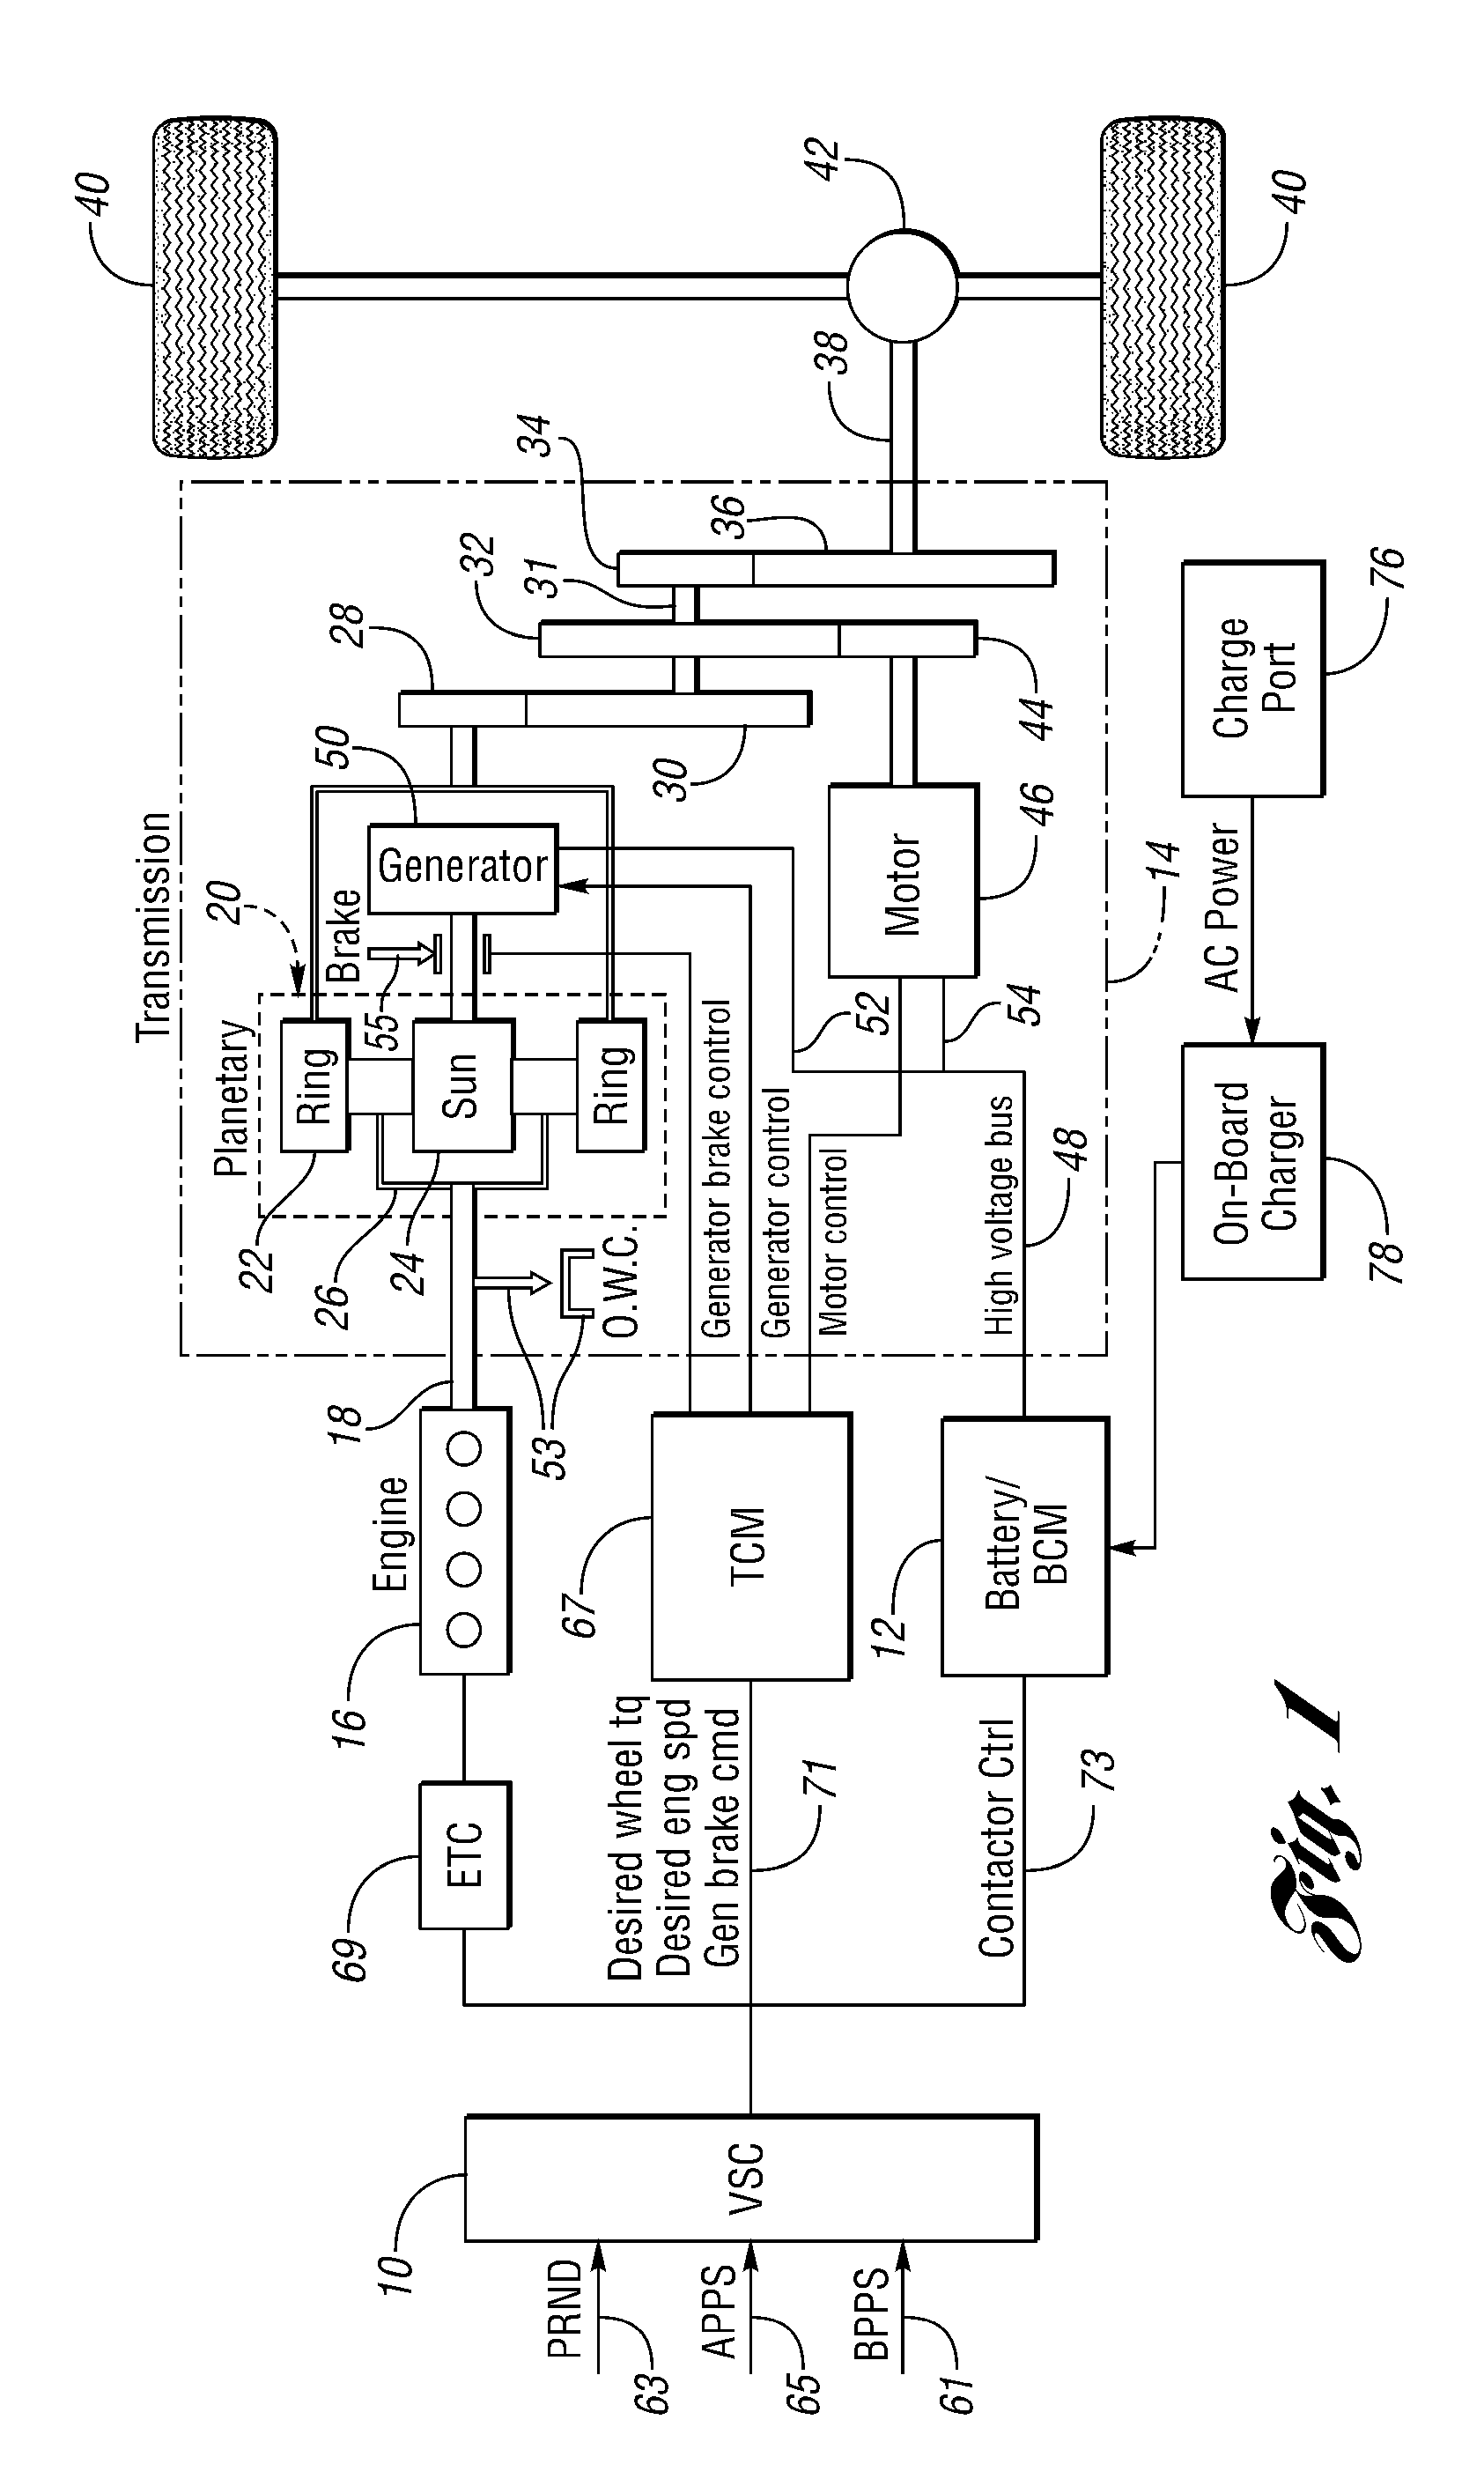 Hybrid electric vehicle and method for smooth engine operation with fixed throttle position